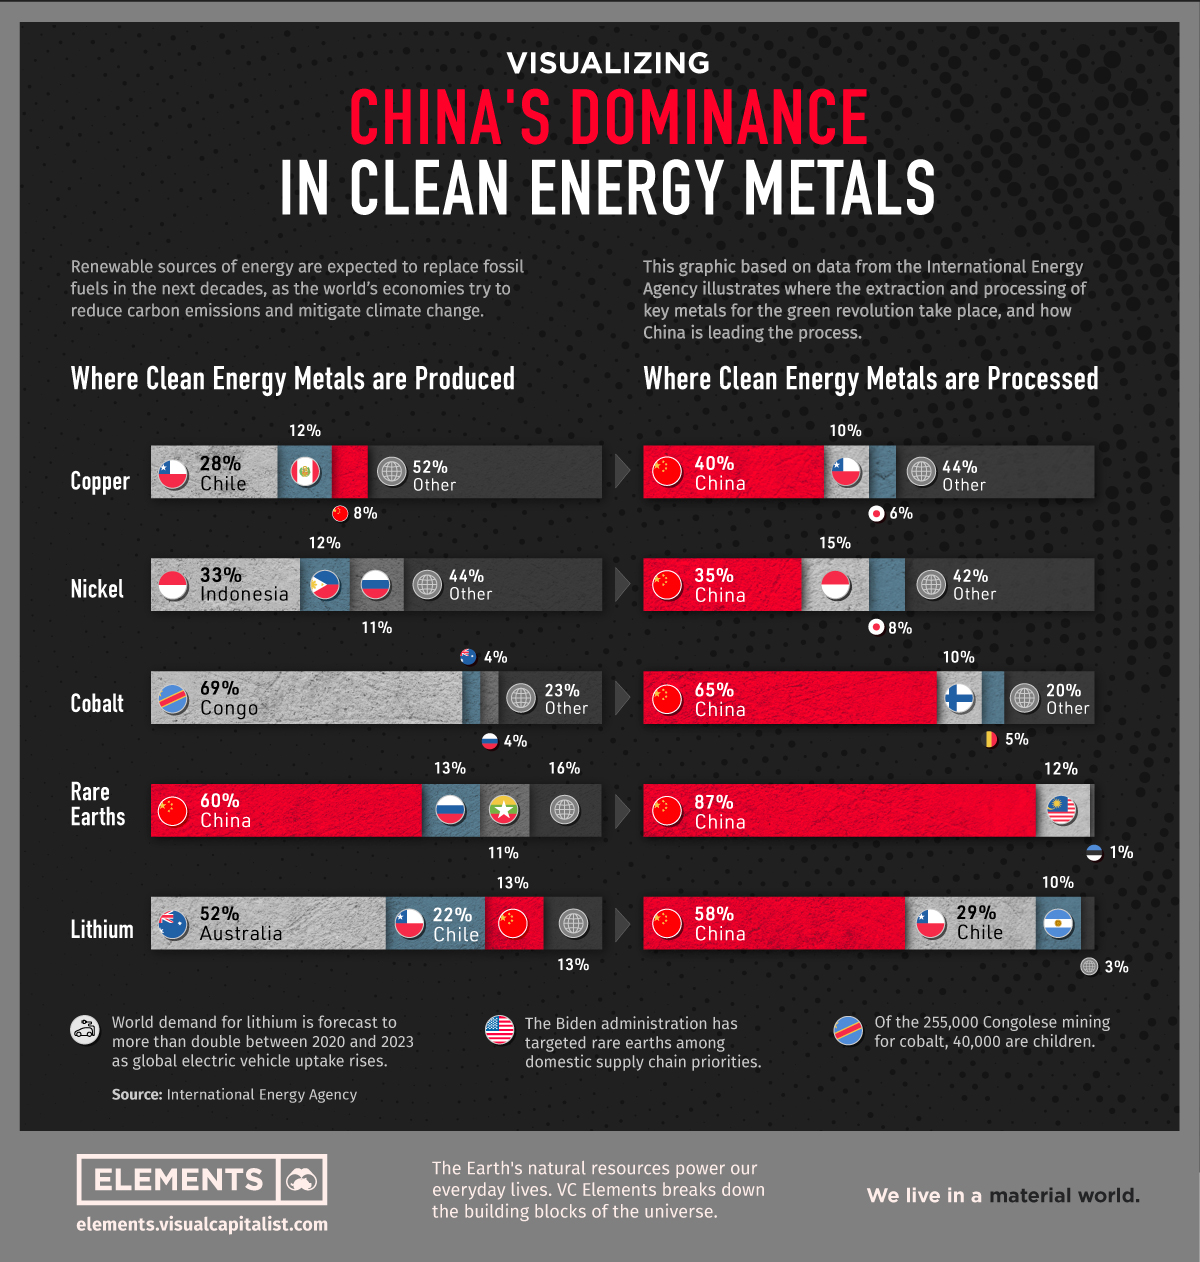 https://elements.visualcapitalist.com/wp-content/uploads/2022/01/Visualizing-Chinas-Dominance-in-Clean-Energy-Metals-1.jpg